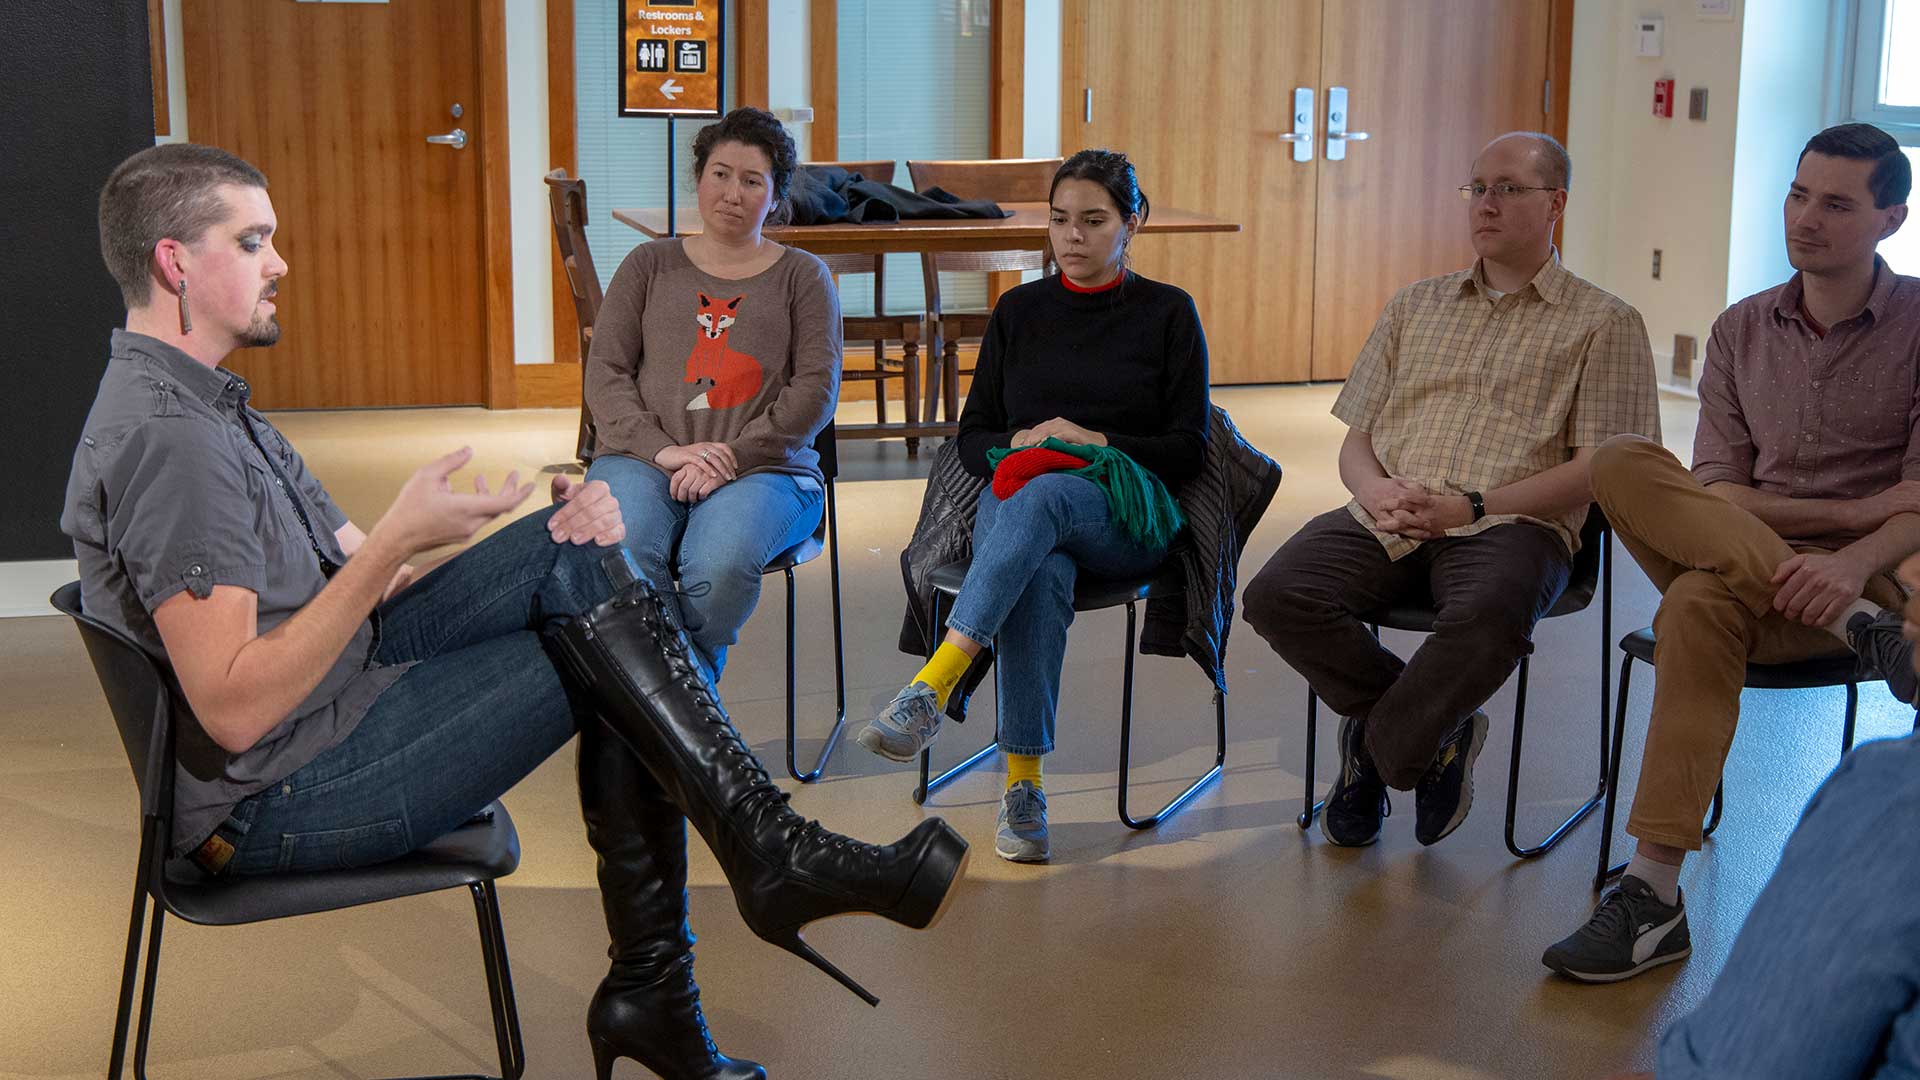 A seated man in makeup with earrings and stilletto platform boots speaks to several people in a museum gallery